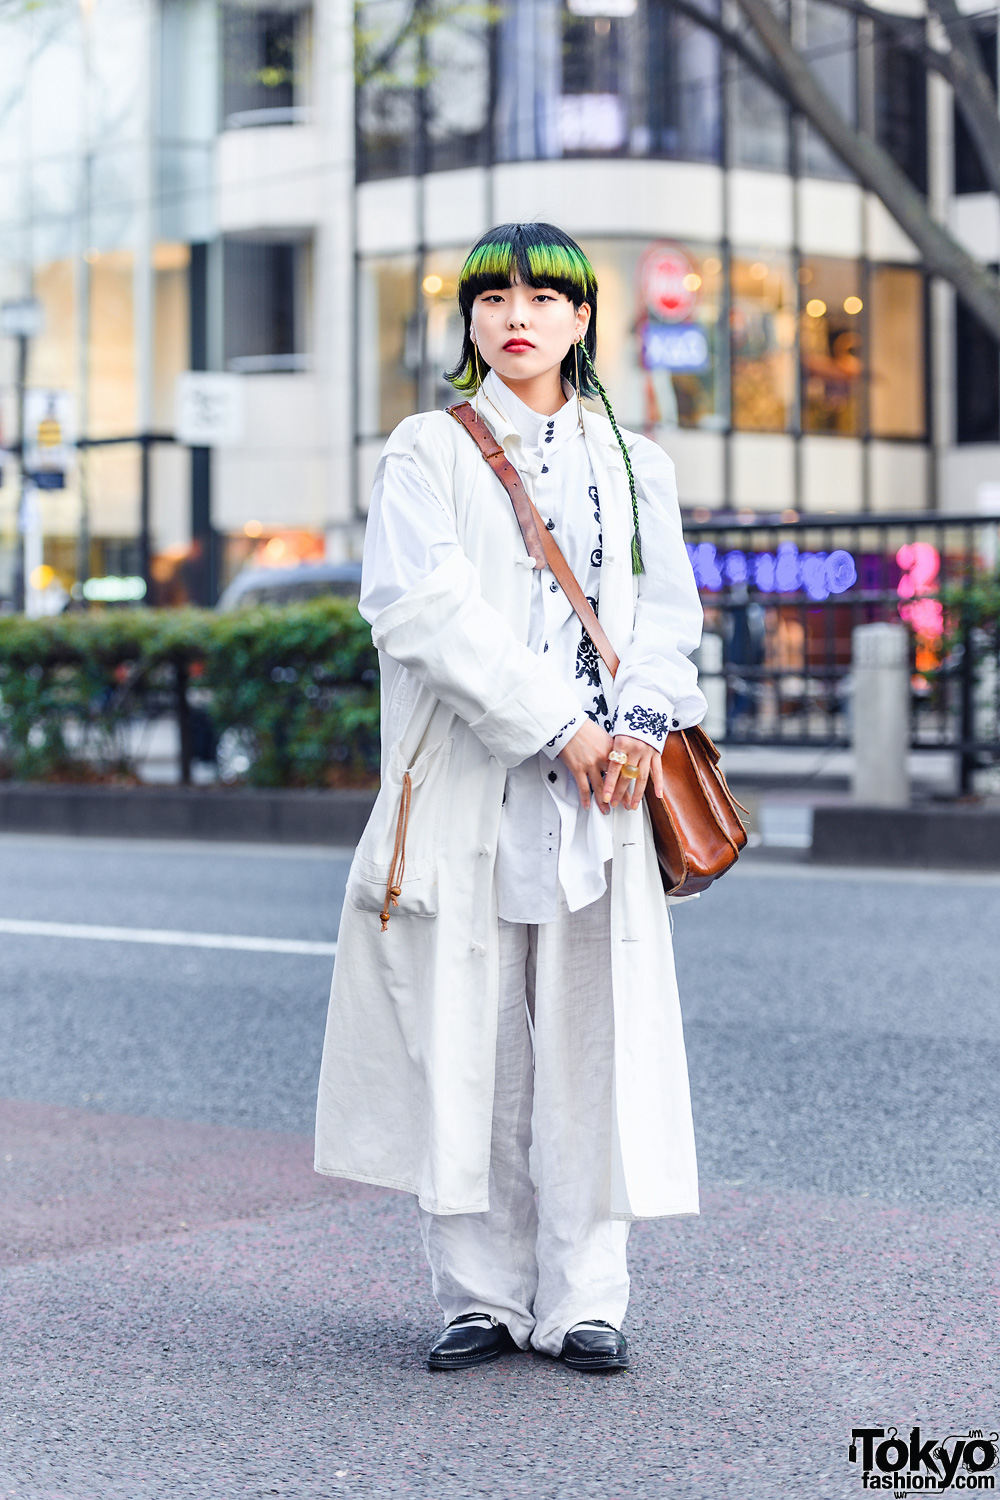 All White Vintage Fashion in Harajuku w/ Green Hair, Belted Coat, Embroidered Shirt, Khaki Pants, Gucci & Toga Strappy Flats